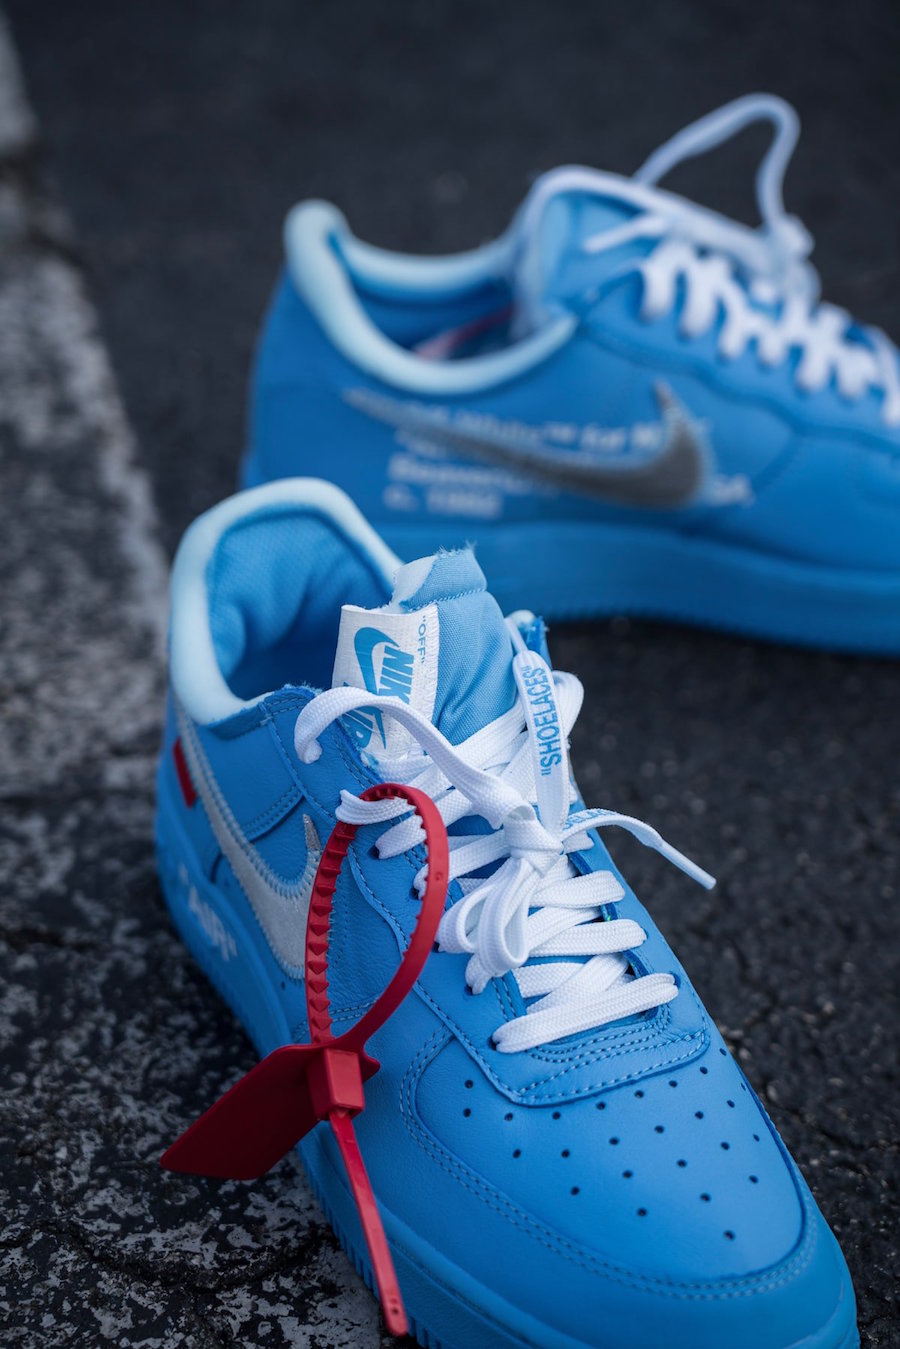 air force 1 off white unc